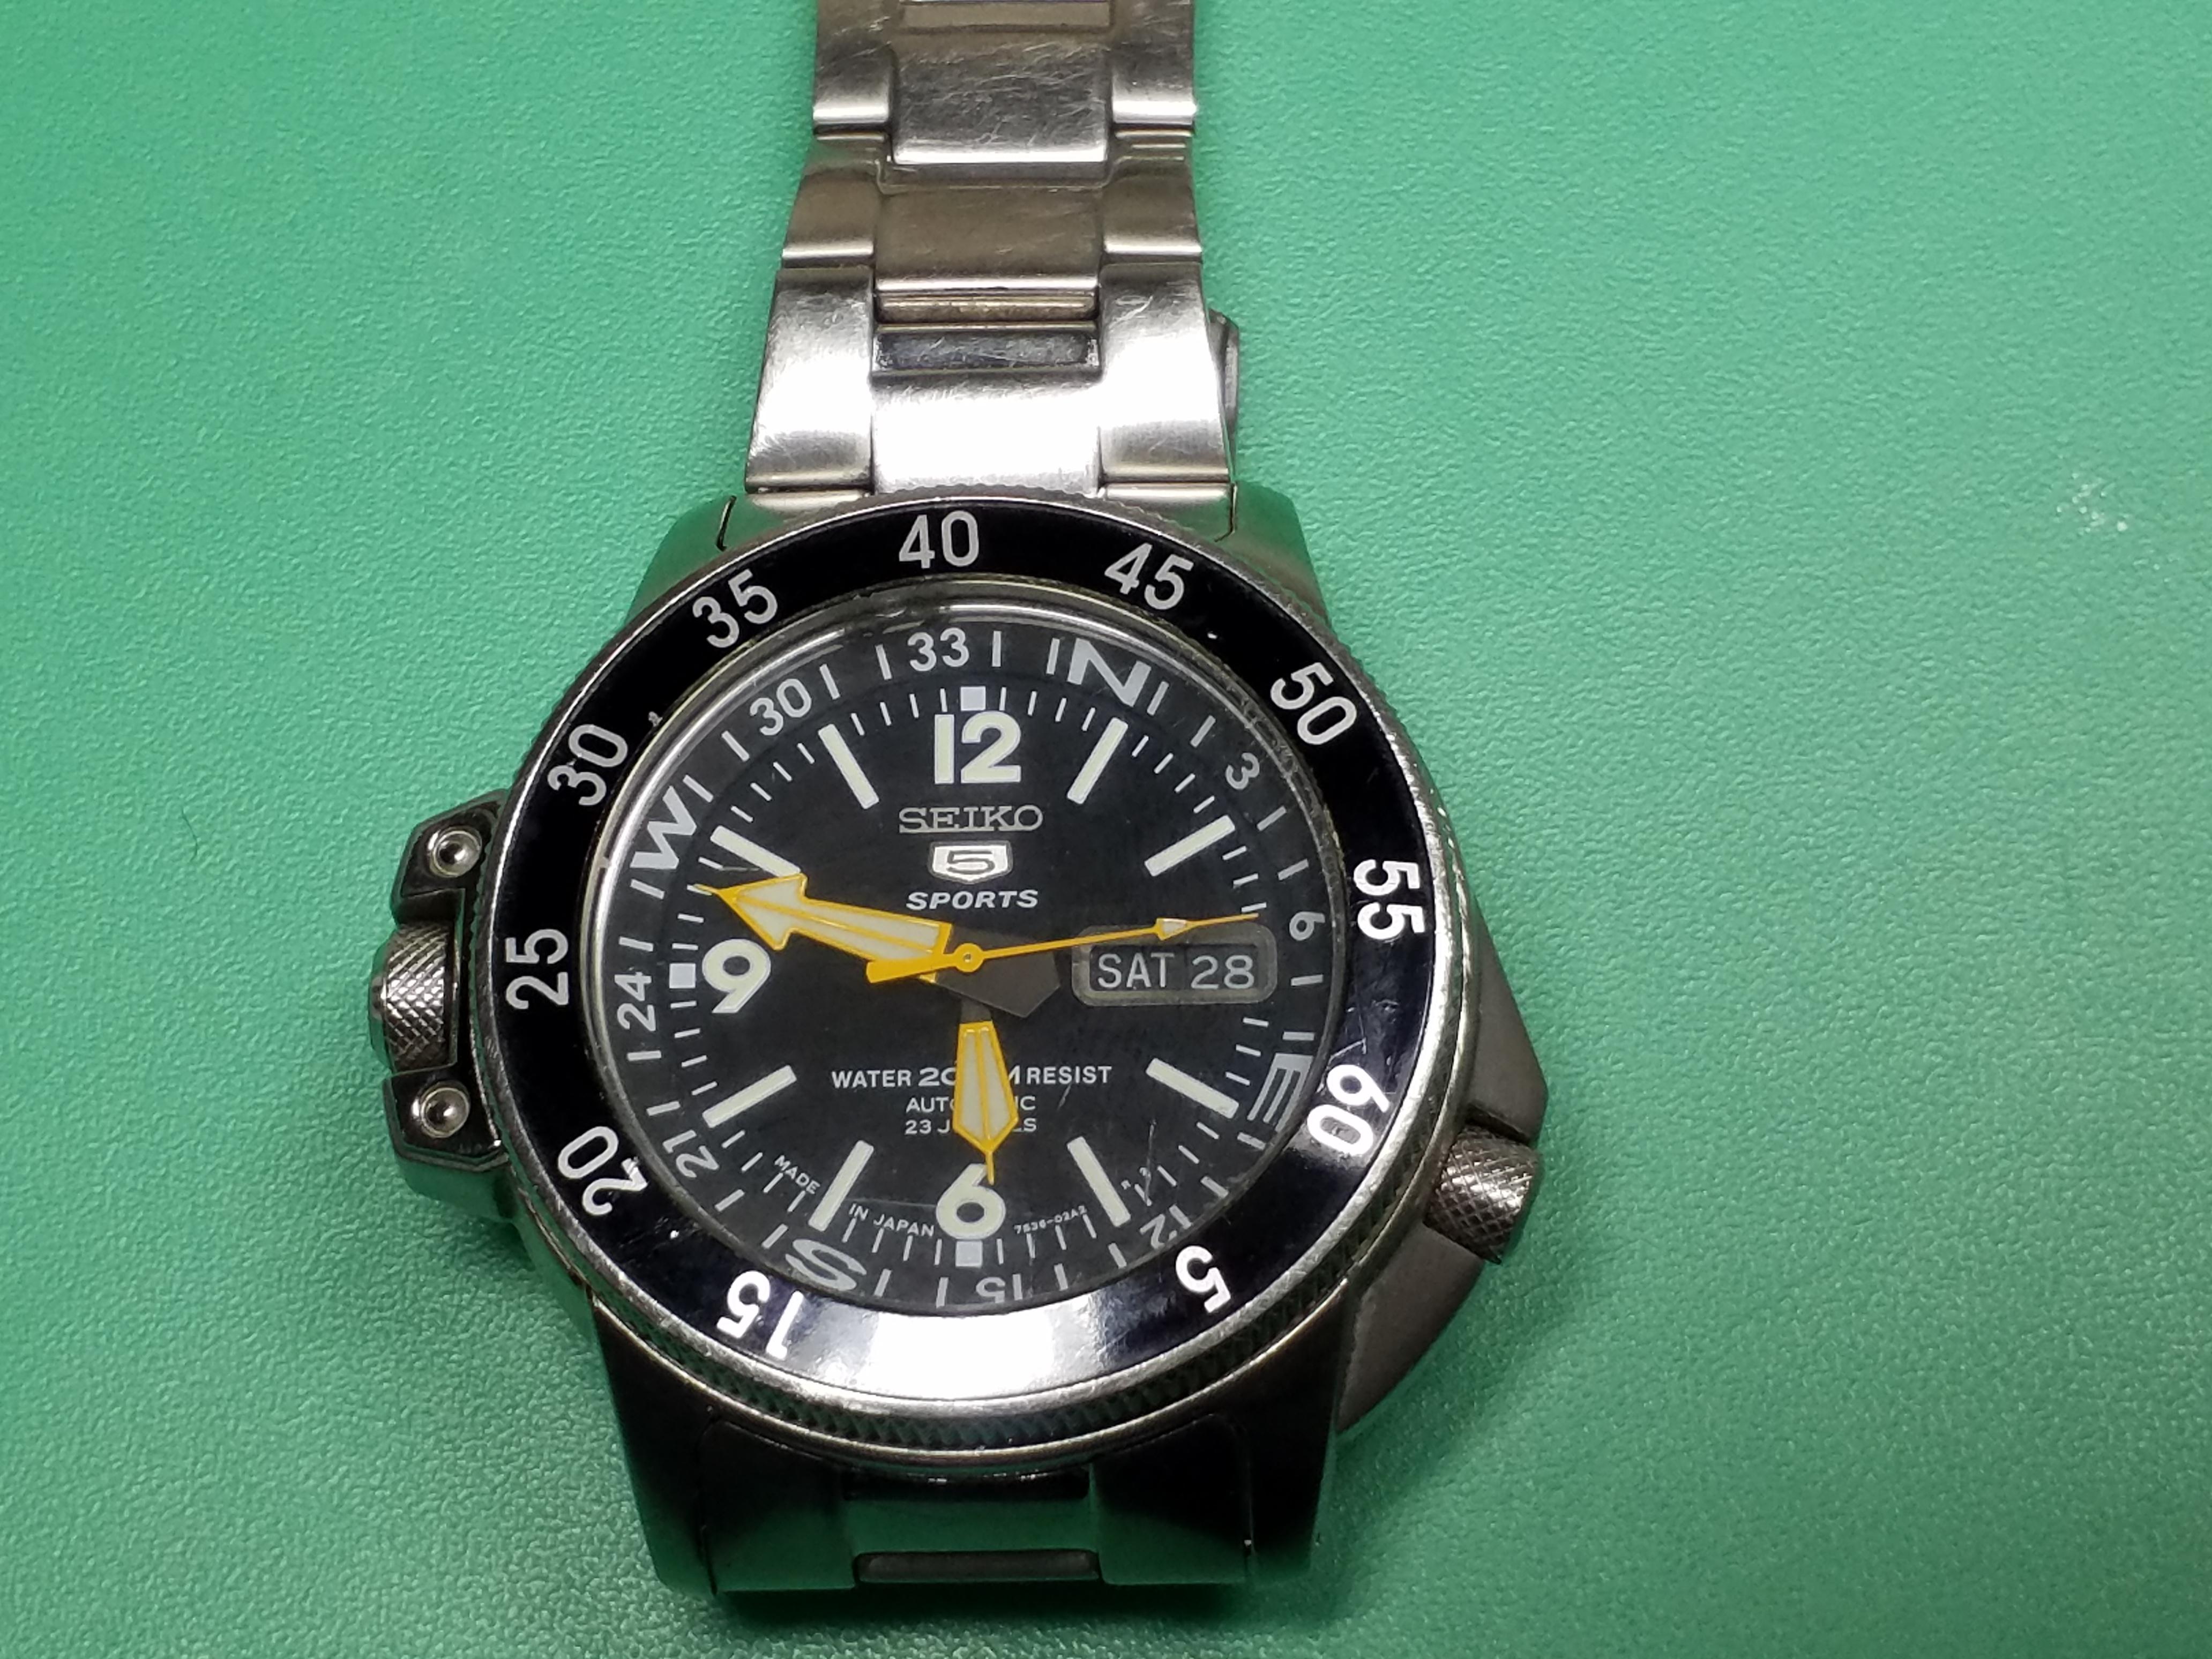 Seiko SKZ 221J1 Land Shark/Atlas Crystal Replacement - Watch Parts,  Sourcing Parts, Movements, Materials and Lubrication Products - Watch  Repair Talk